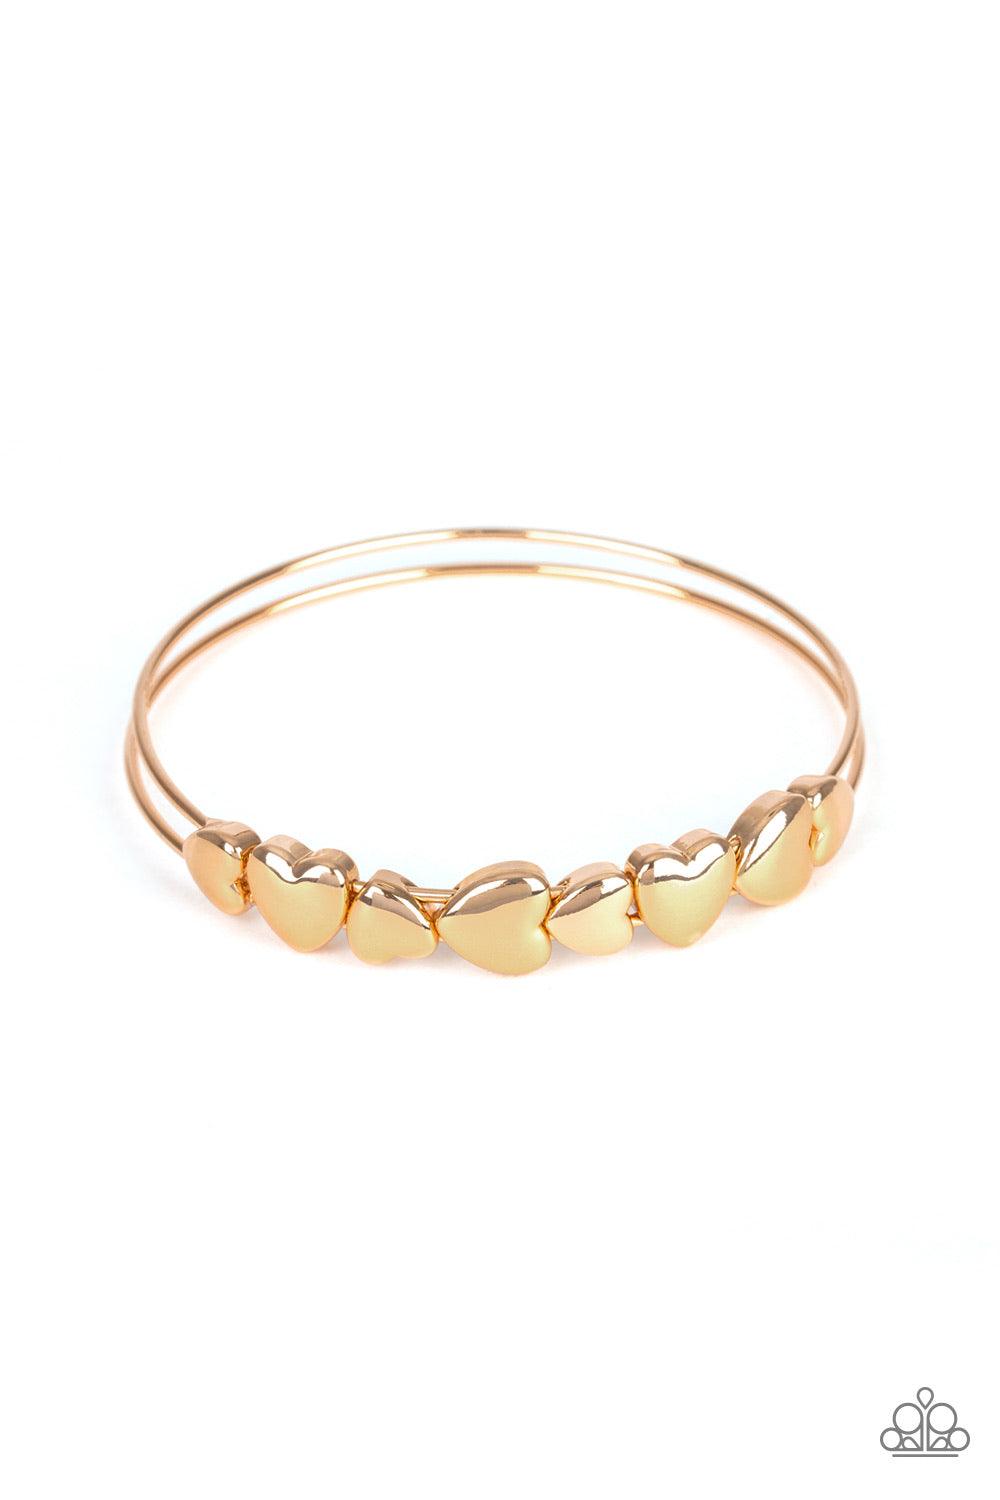 Paparazzi Accessories Totally Tenderhearted - Gold A charming collection of gold heart frames coalesce around a doubled gold bangle, creating a whimsical centerpiece. Jewelry